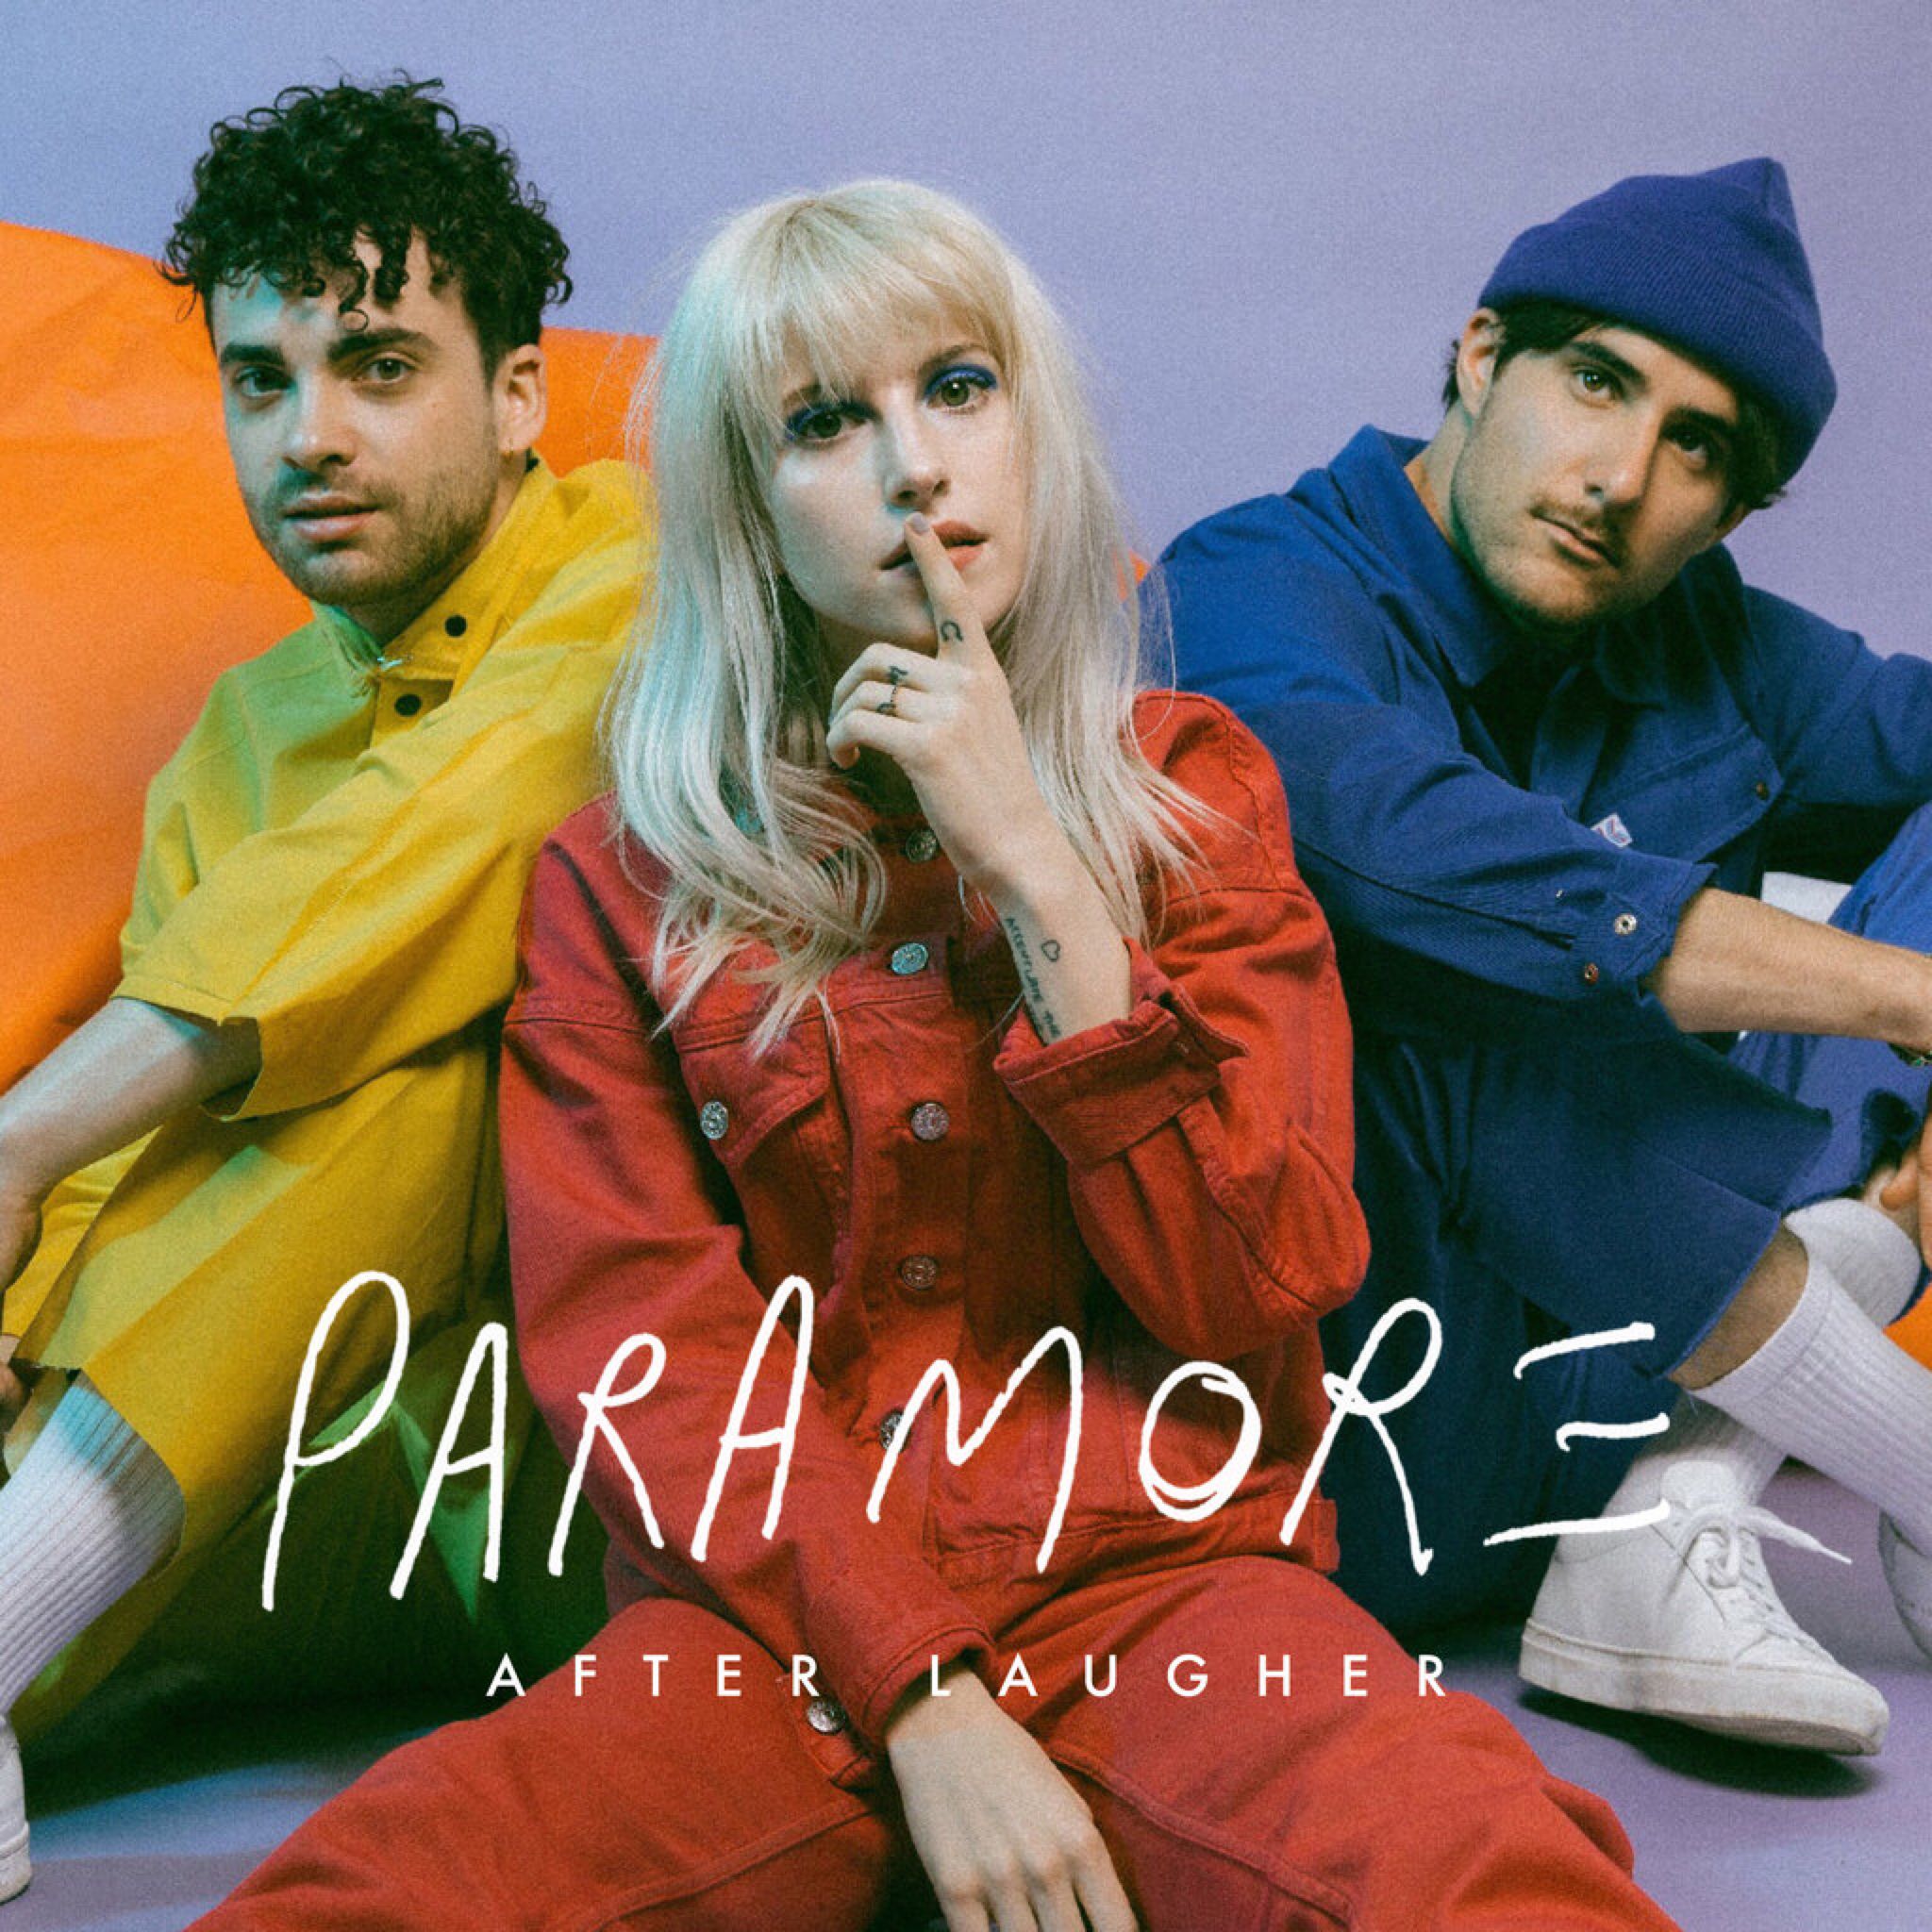 Paramore Laughter. Paramore, Paramore after laughter, Paramore hayley williams